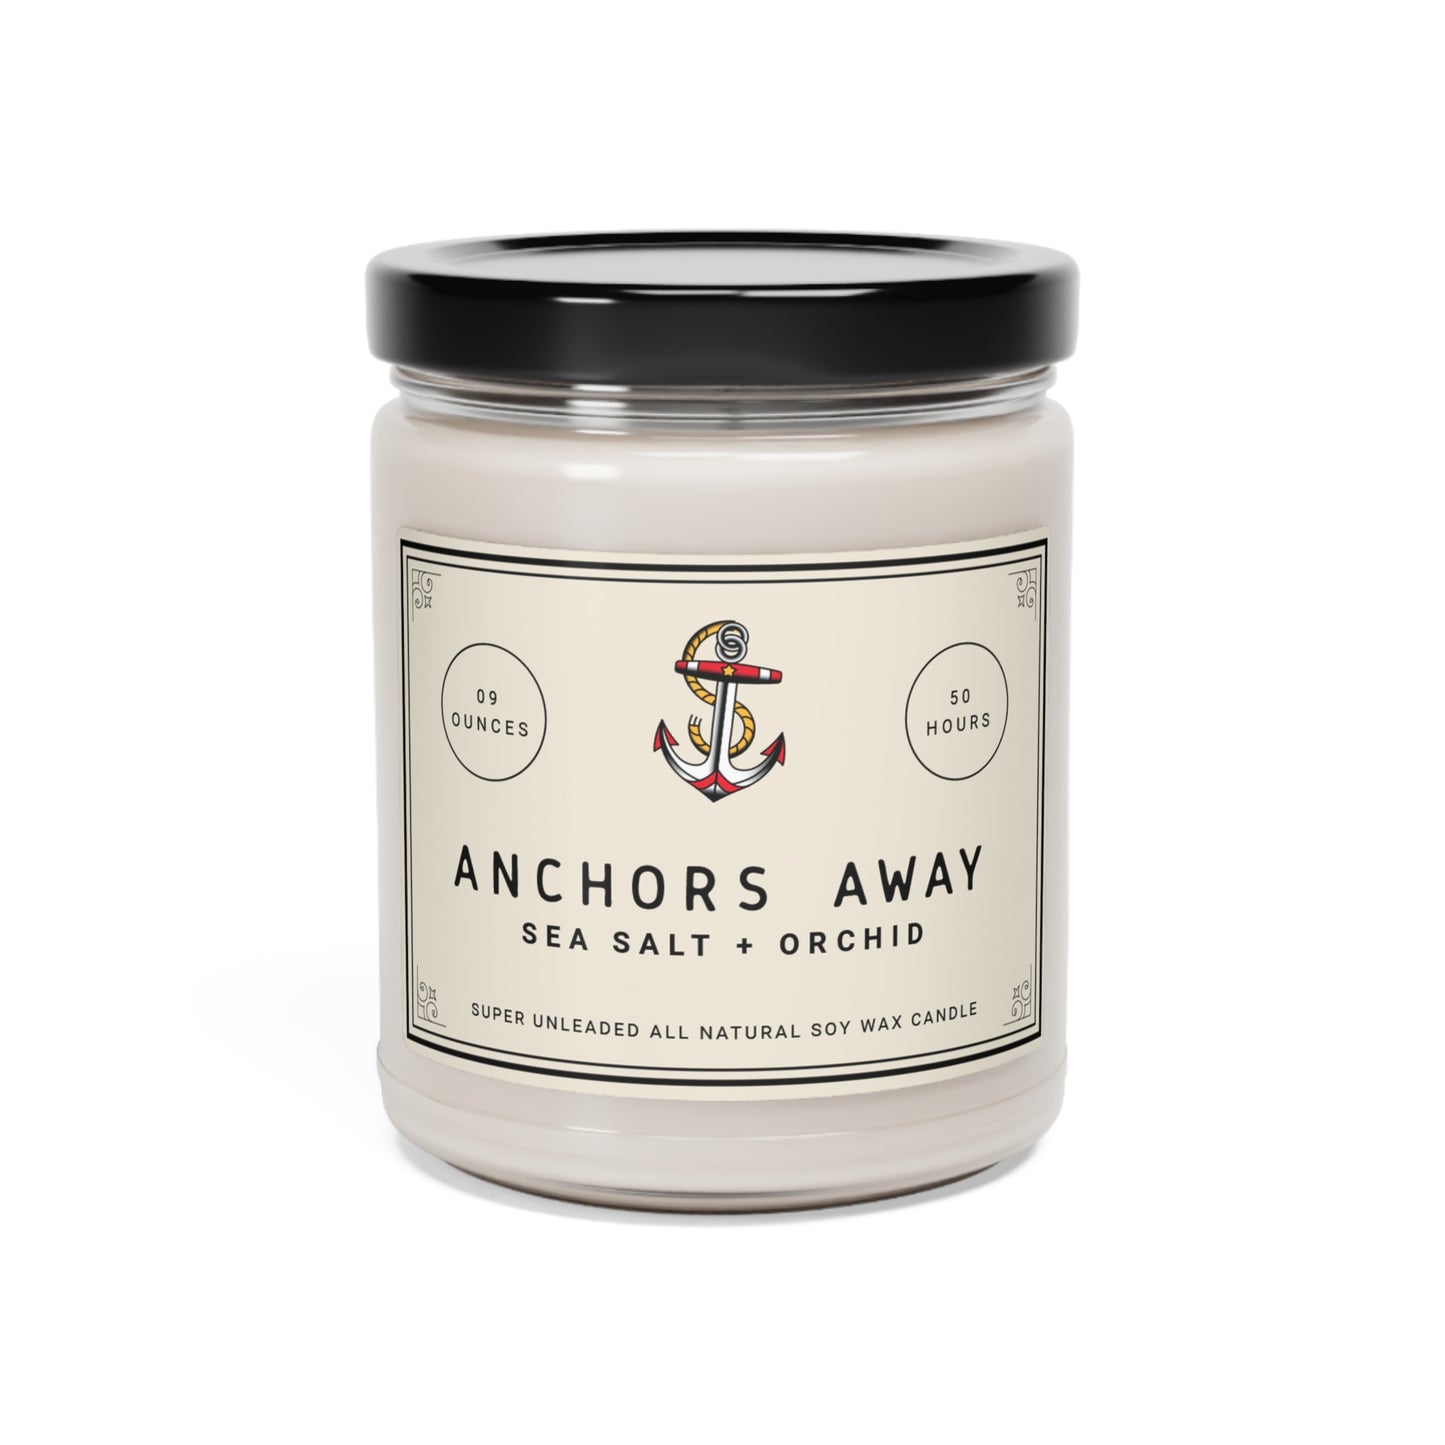 Anchors Away (Sea Salt + Orchid) Soy Candle